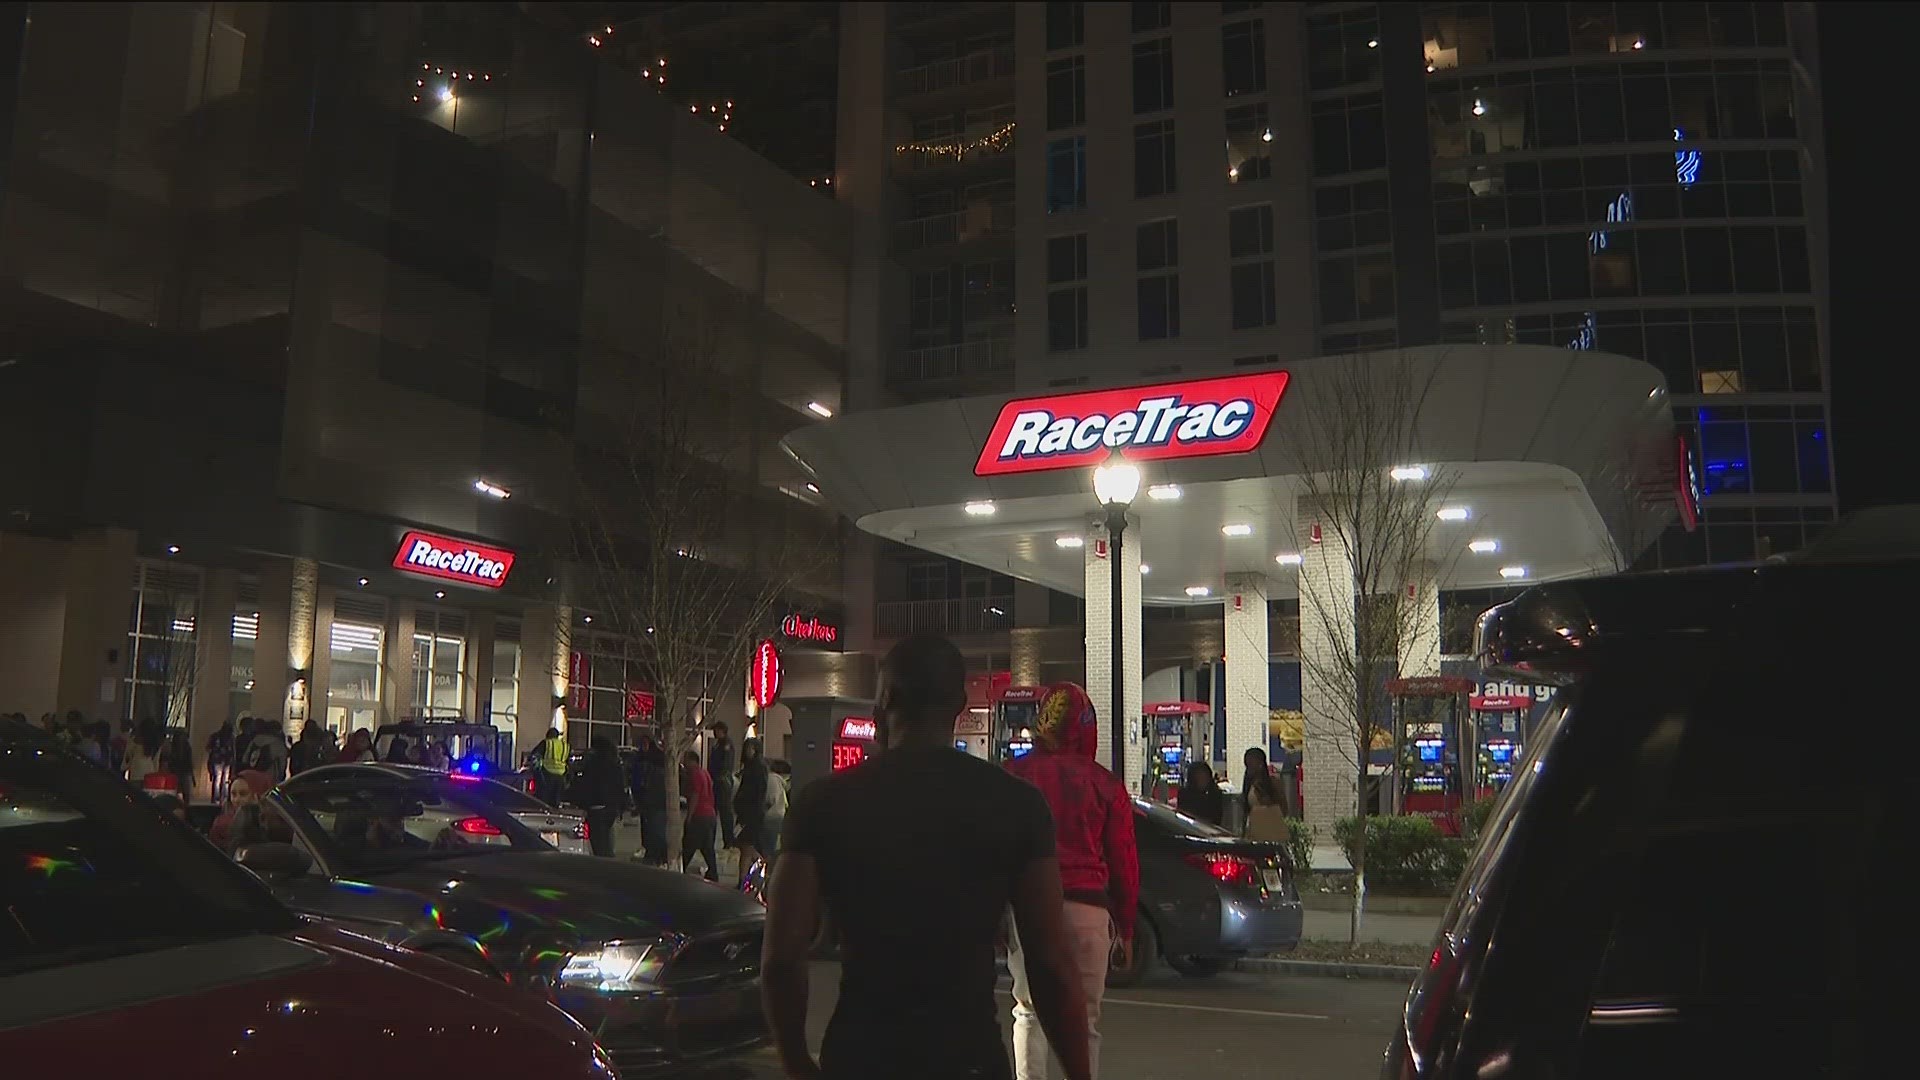 Atlanta Police said a person was shot at a RaceTrac gas station across from a Georgia State dining hall.